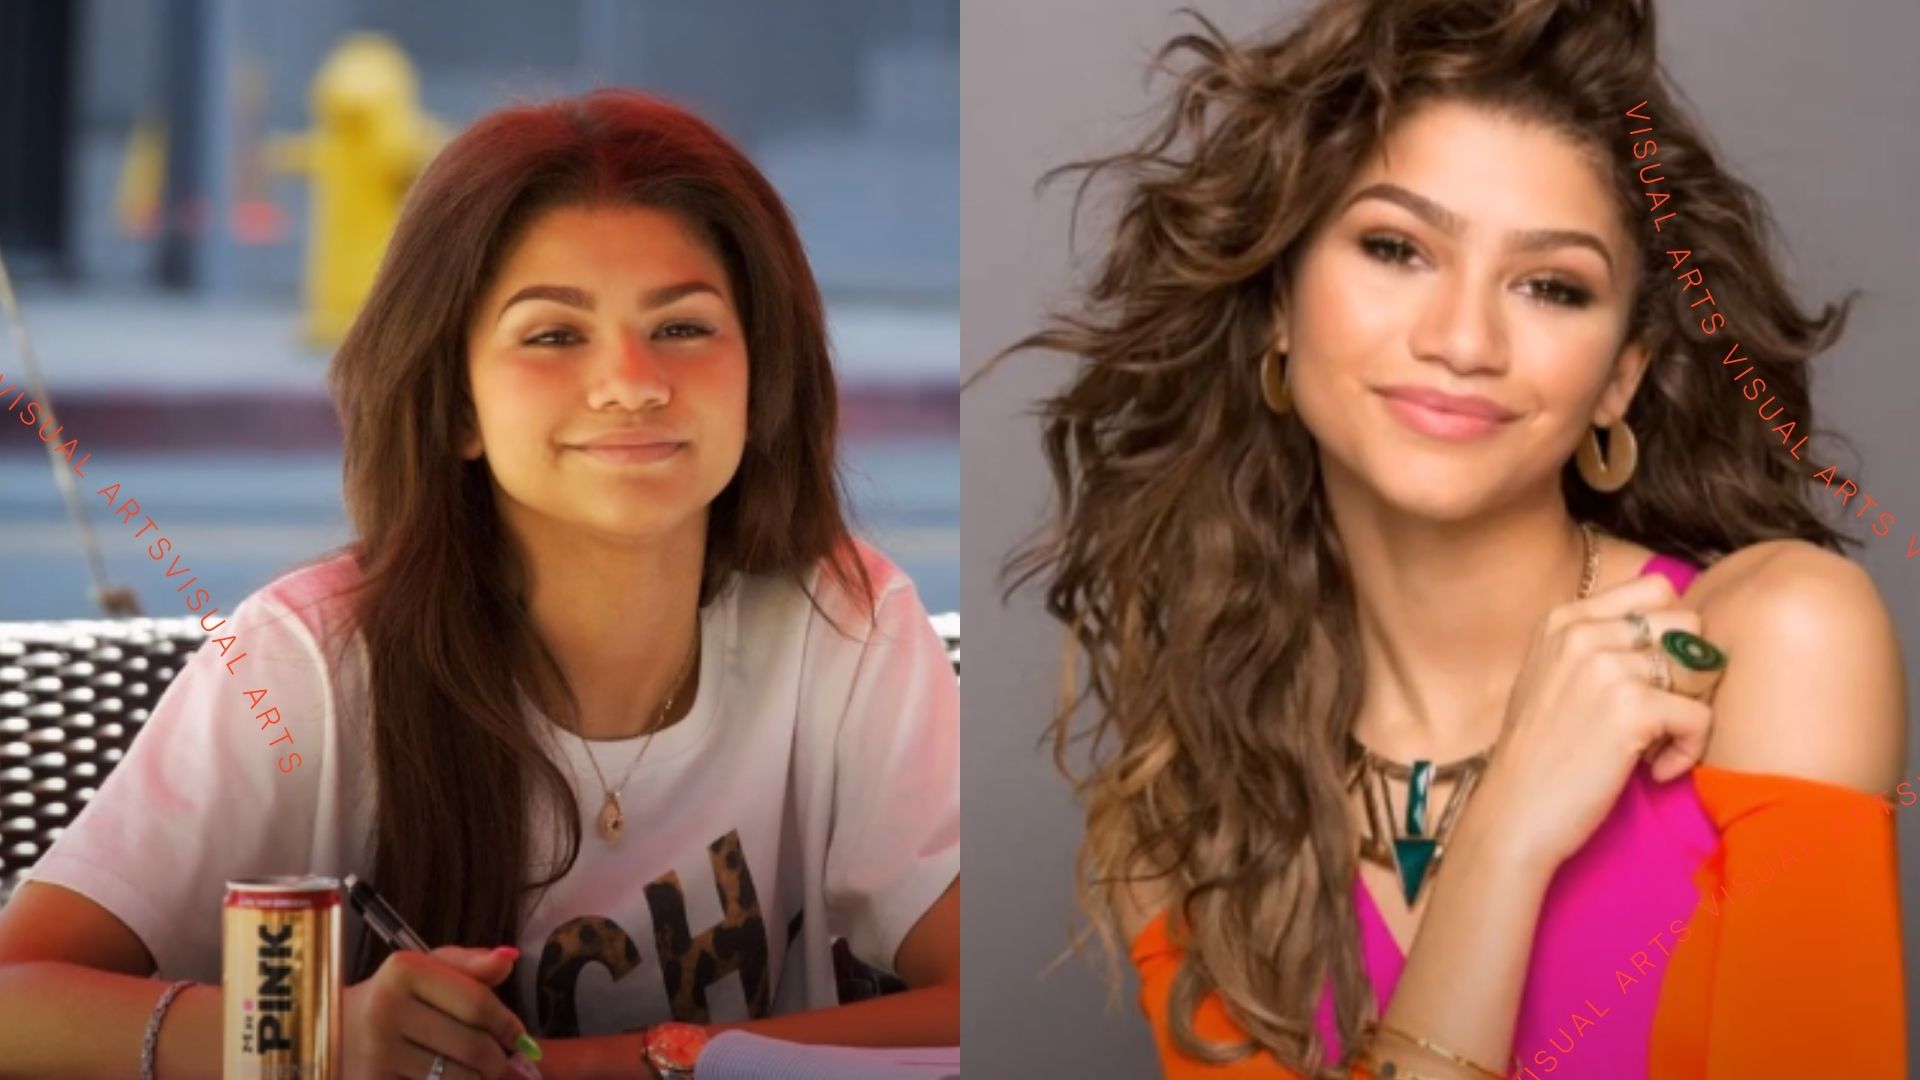 Zendaya Plastic Surgery Before and After Plastic